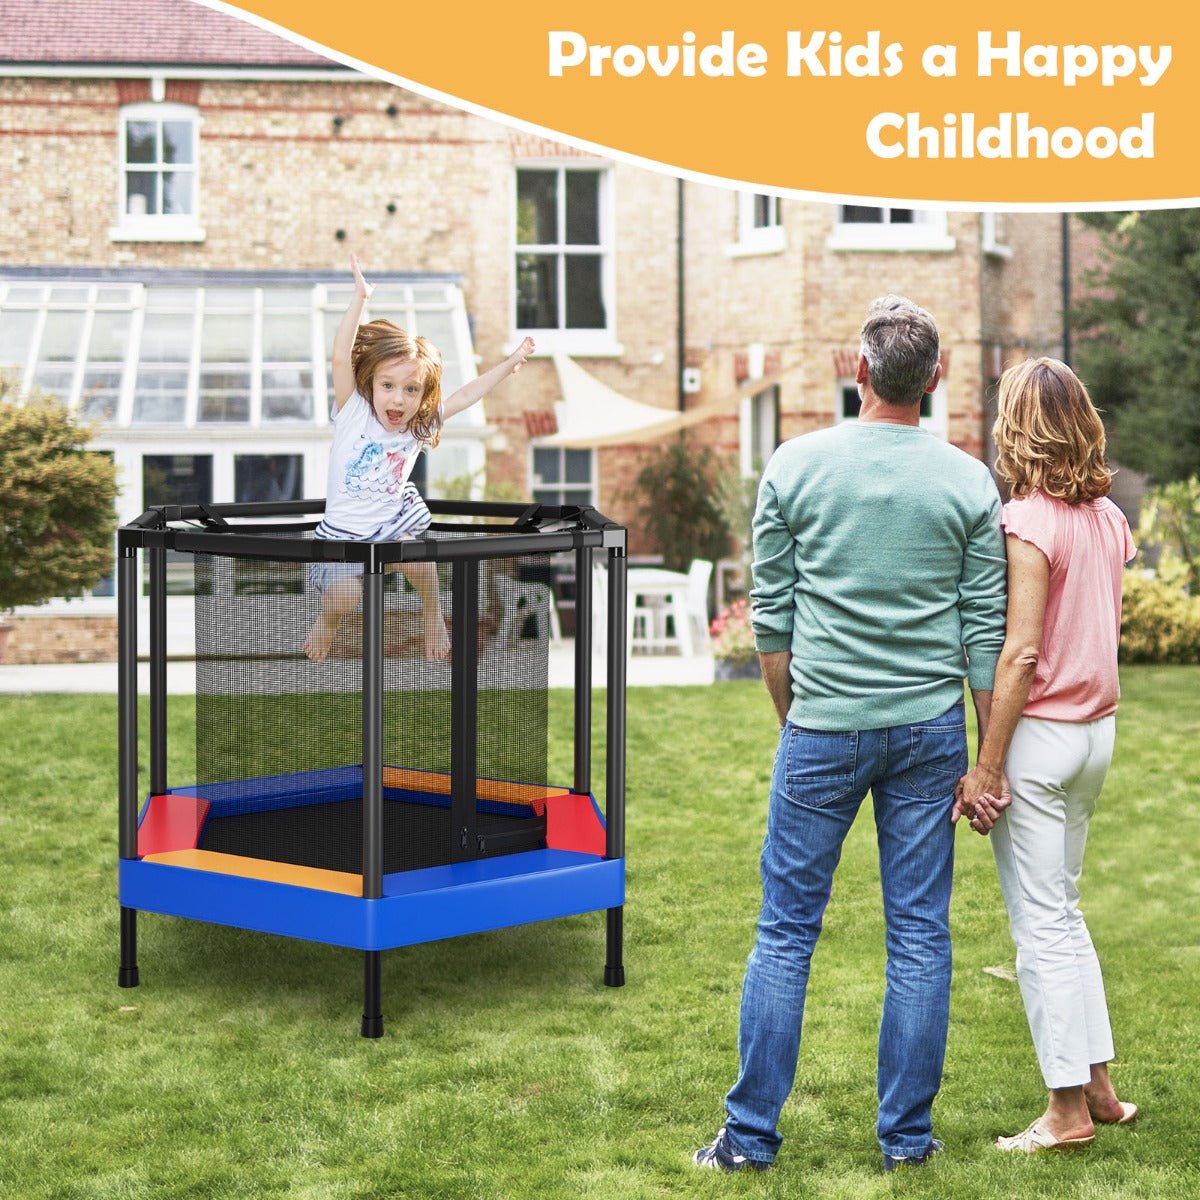 Energetic Fun: 48 Inches Kids Trampoline with Safety Enclosure Net